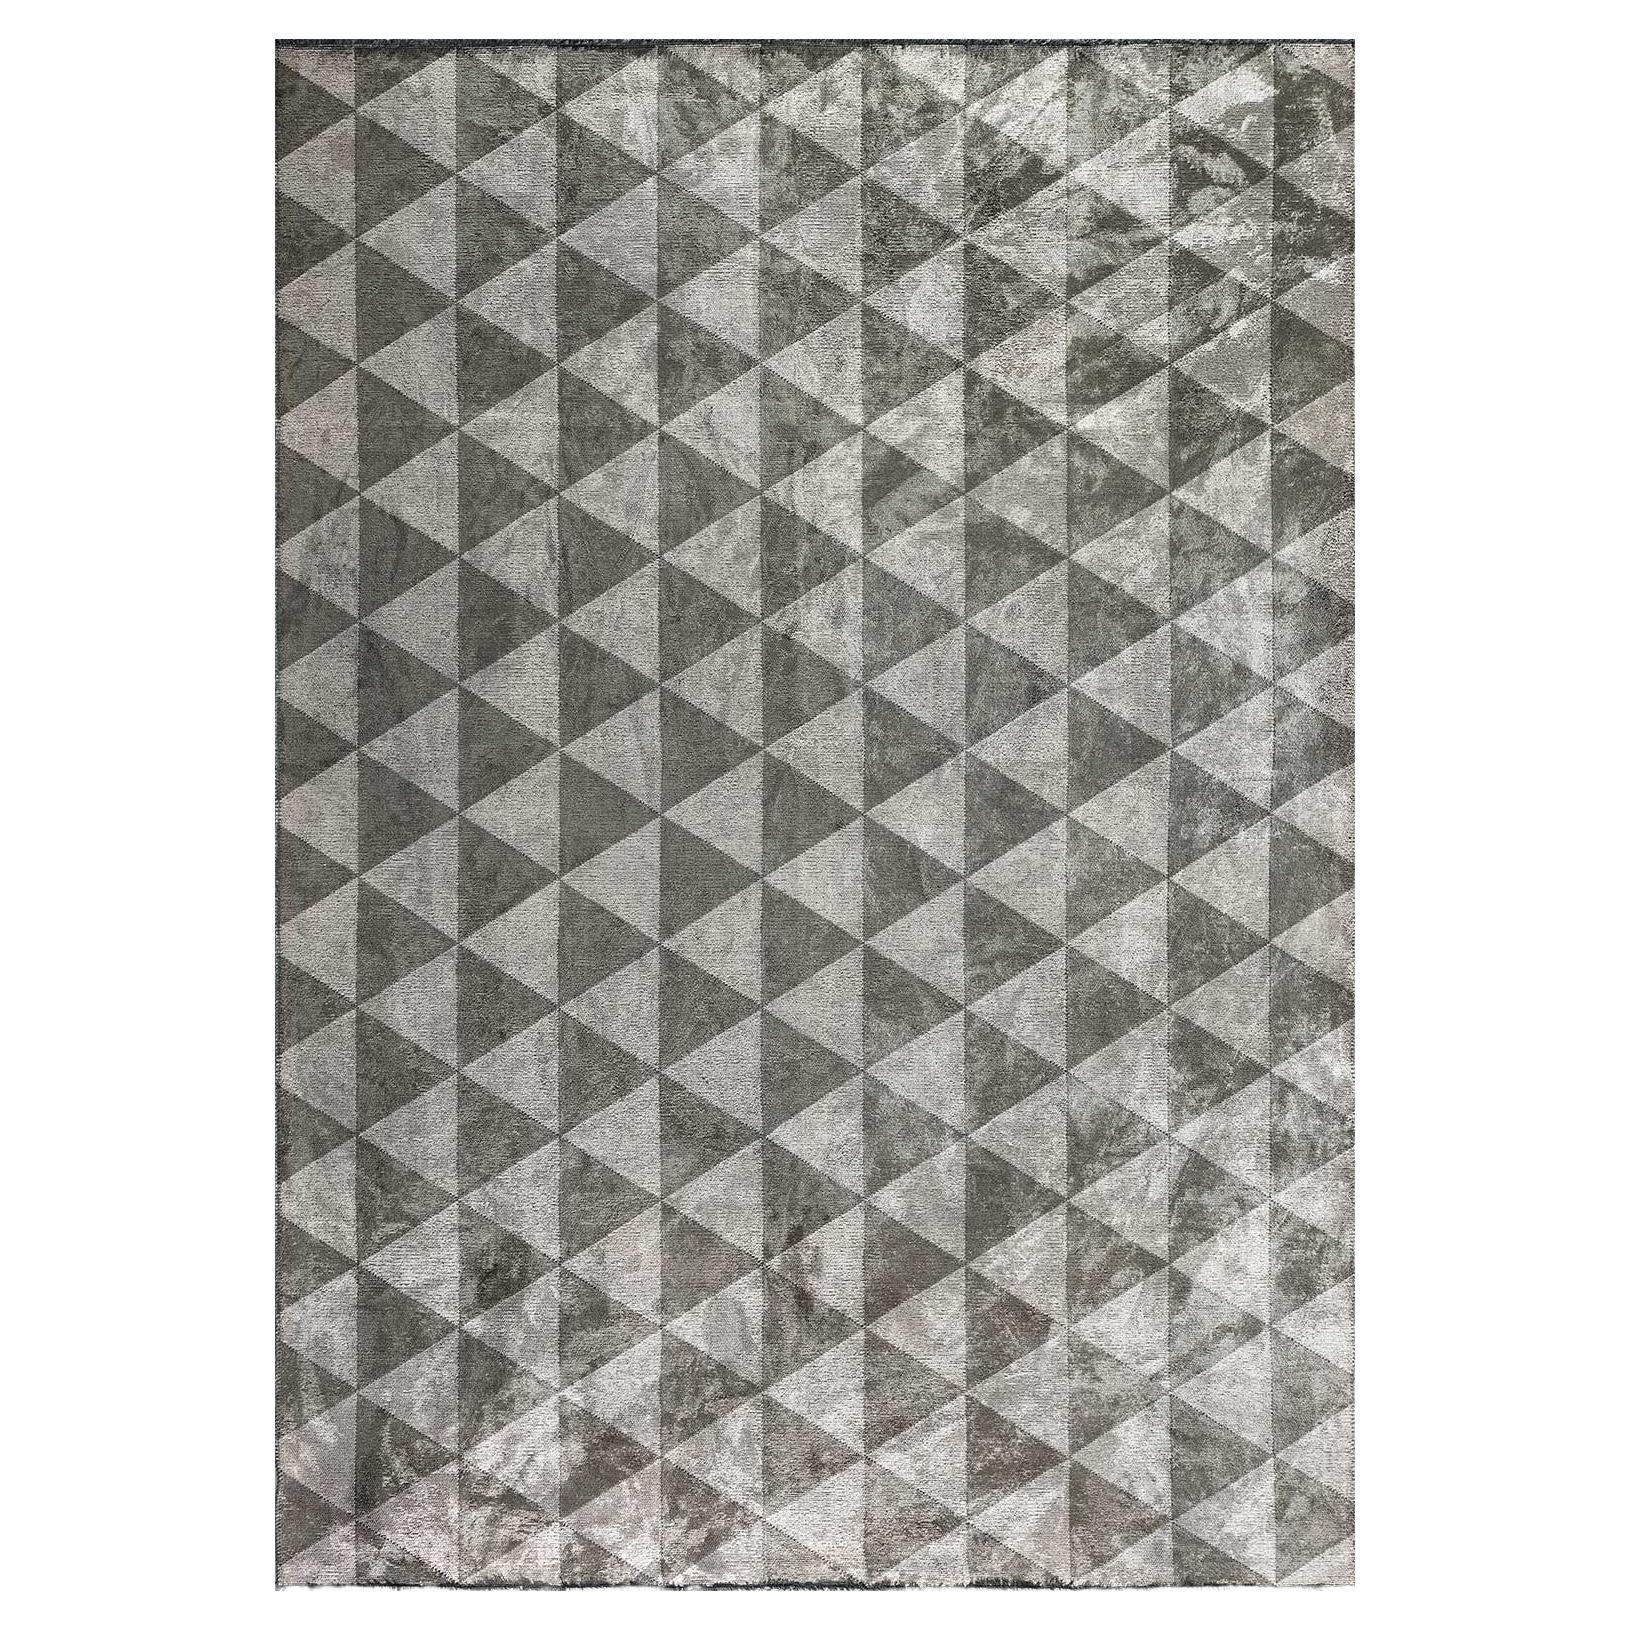 Silver Gray and Khaki Brown Triangle Diamond Geometric Pattern Rug with Shine For Sale